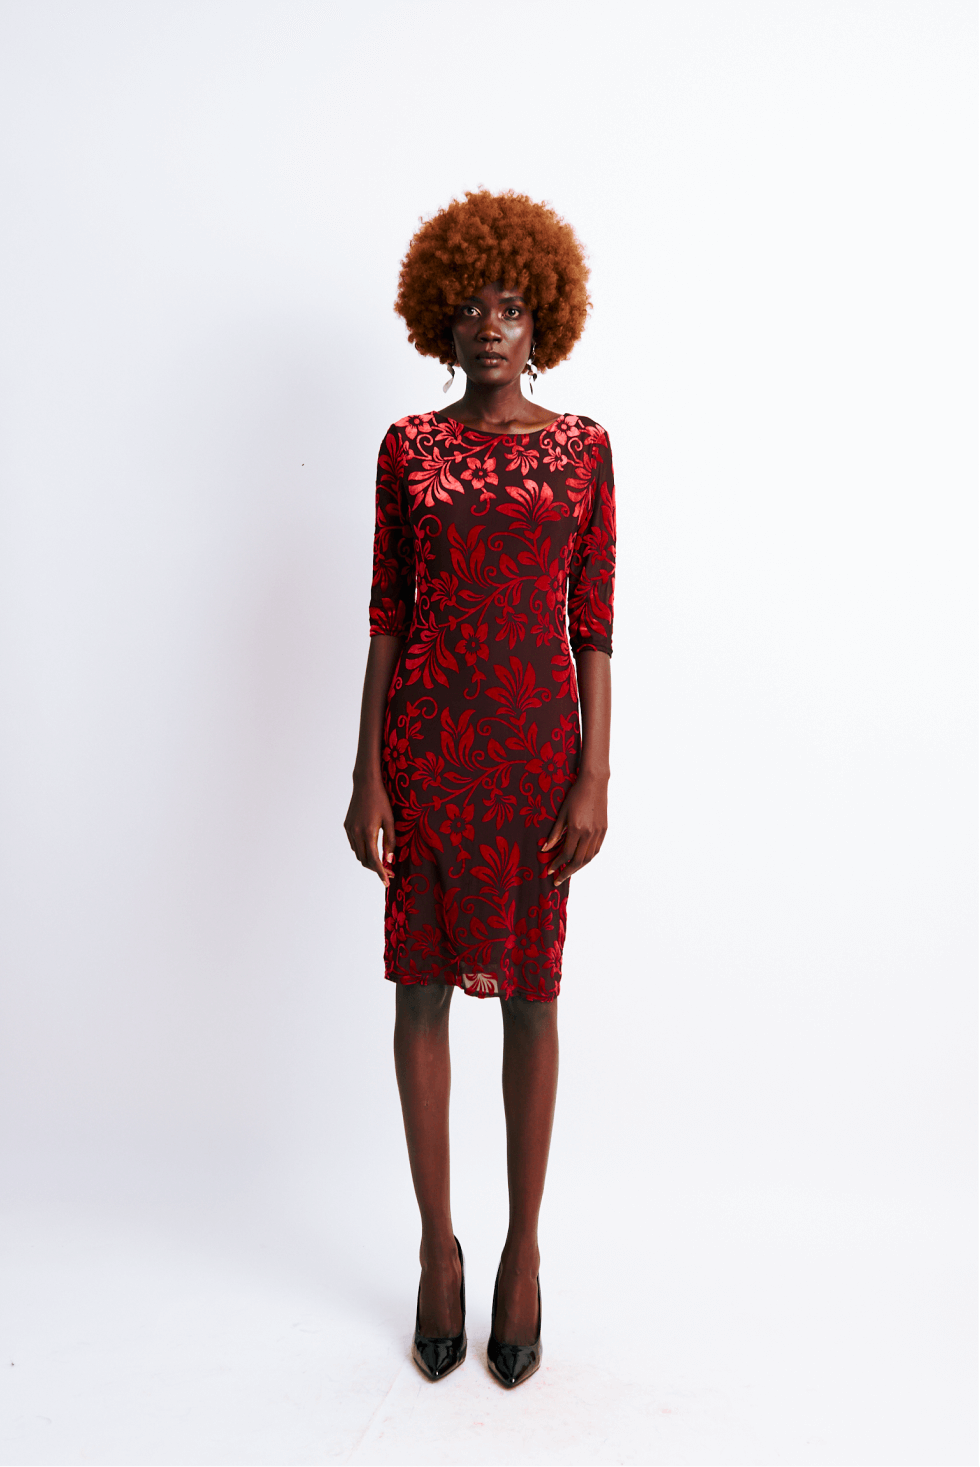 Shop Red Printed Bodycon Dress by The Fashion Frenzy on Arrai. Discover stylish, affordable clothing, jewelry, handbags and unique handmade pieces from top Kenyan & African fashion brands prioritising sustainability and quality craftsmanship.